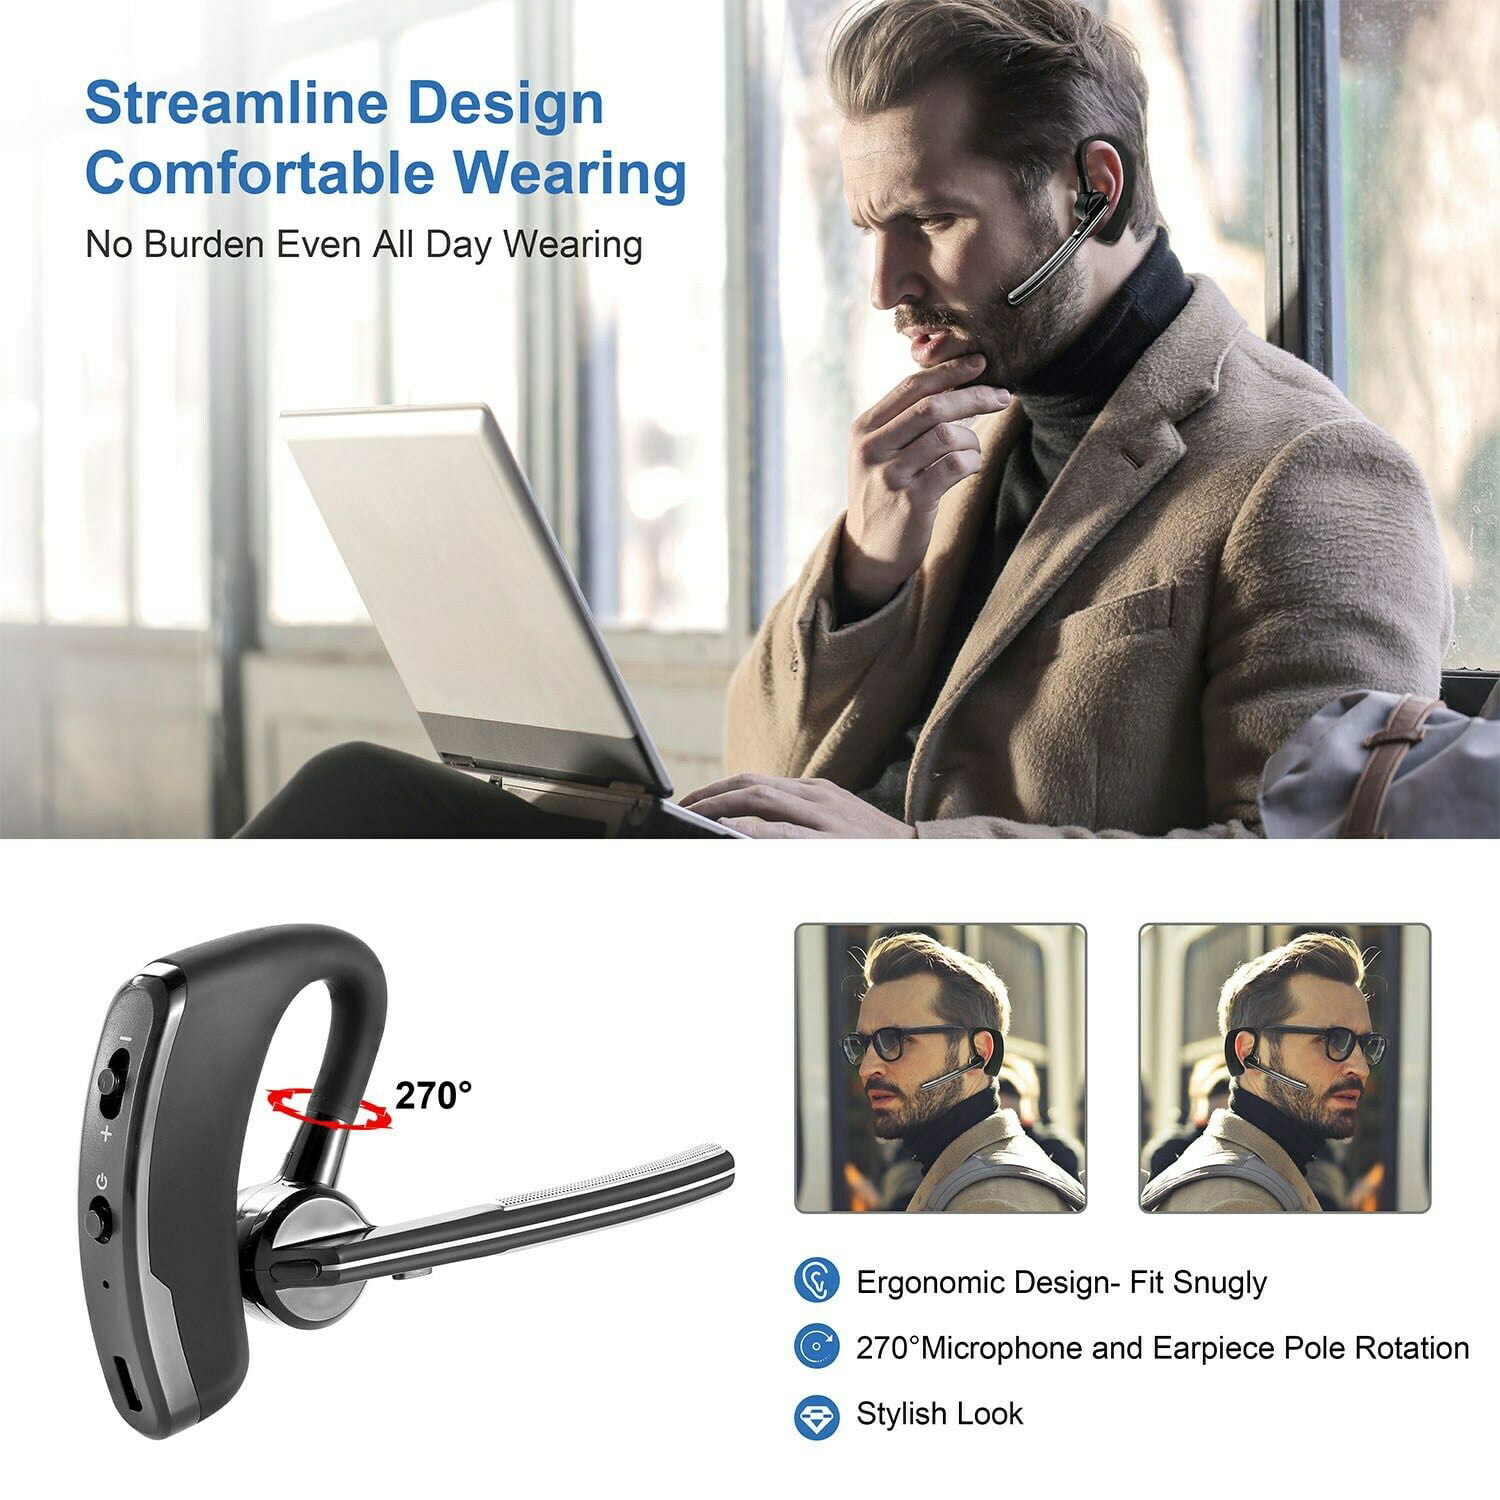 Silver Bluetooth Earpiece for Cell Phones ZEEYU Wireless Bluetooth Headset V5.0 with CVC8.0 Noise Canceling Microphone Hands Free Waterproof for Driving Business Office iPhone Android Samsung 